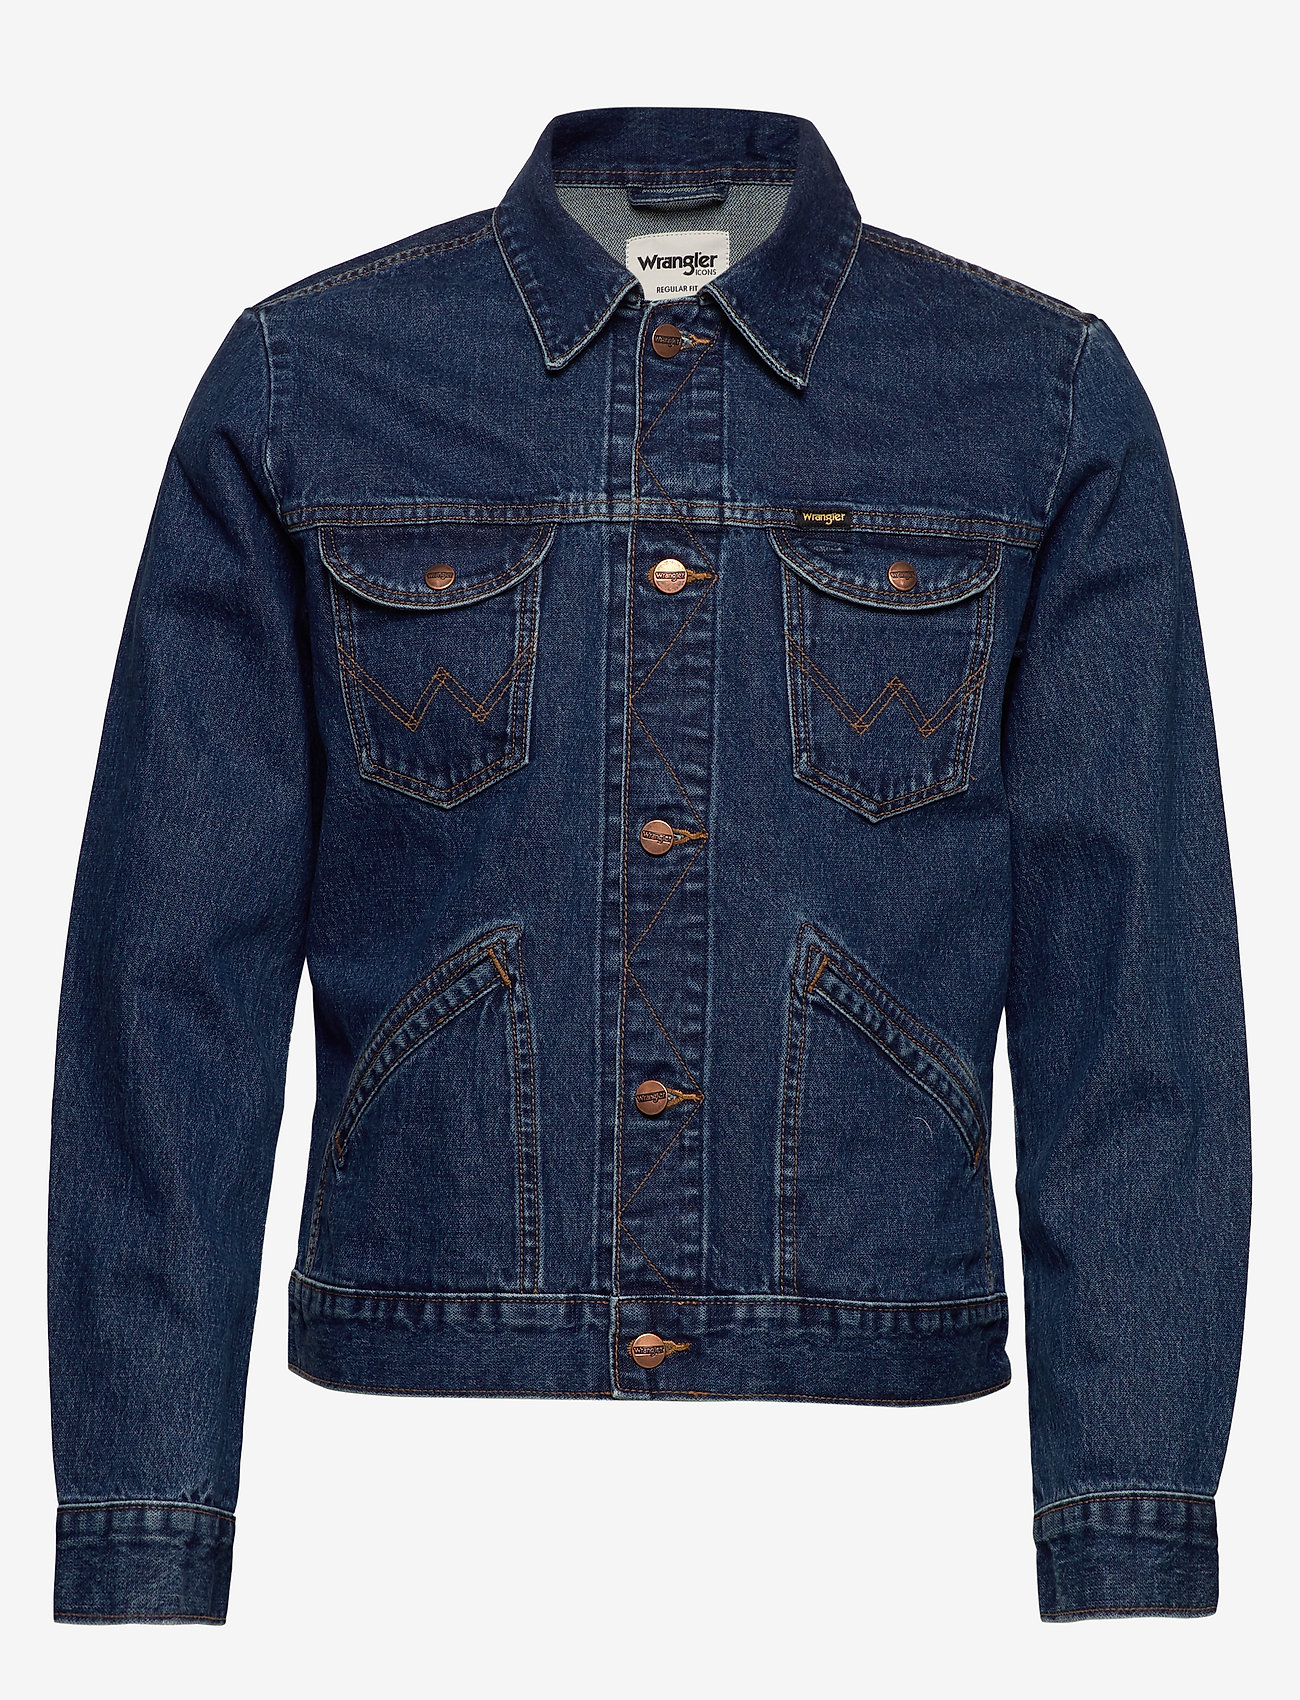 Wrangler 124mj  €. Buy Outerwear from Wrangler online at .  Fast delivery and easy returns